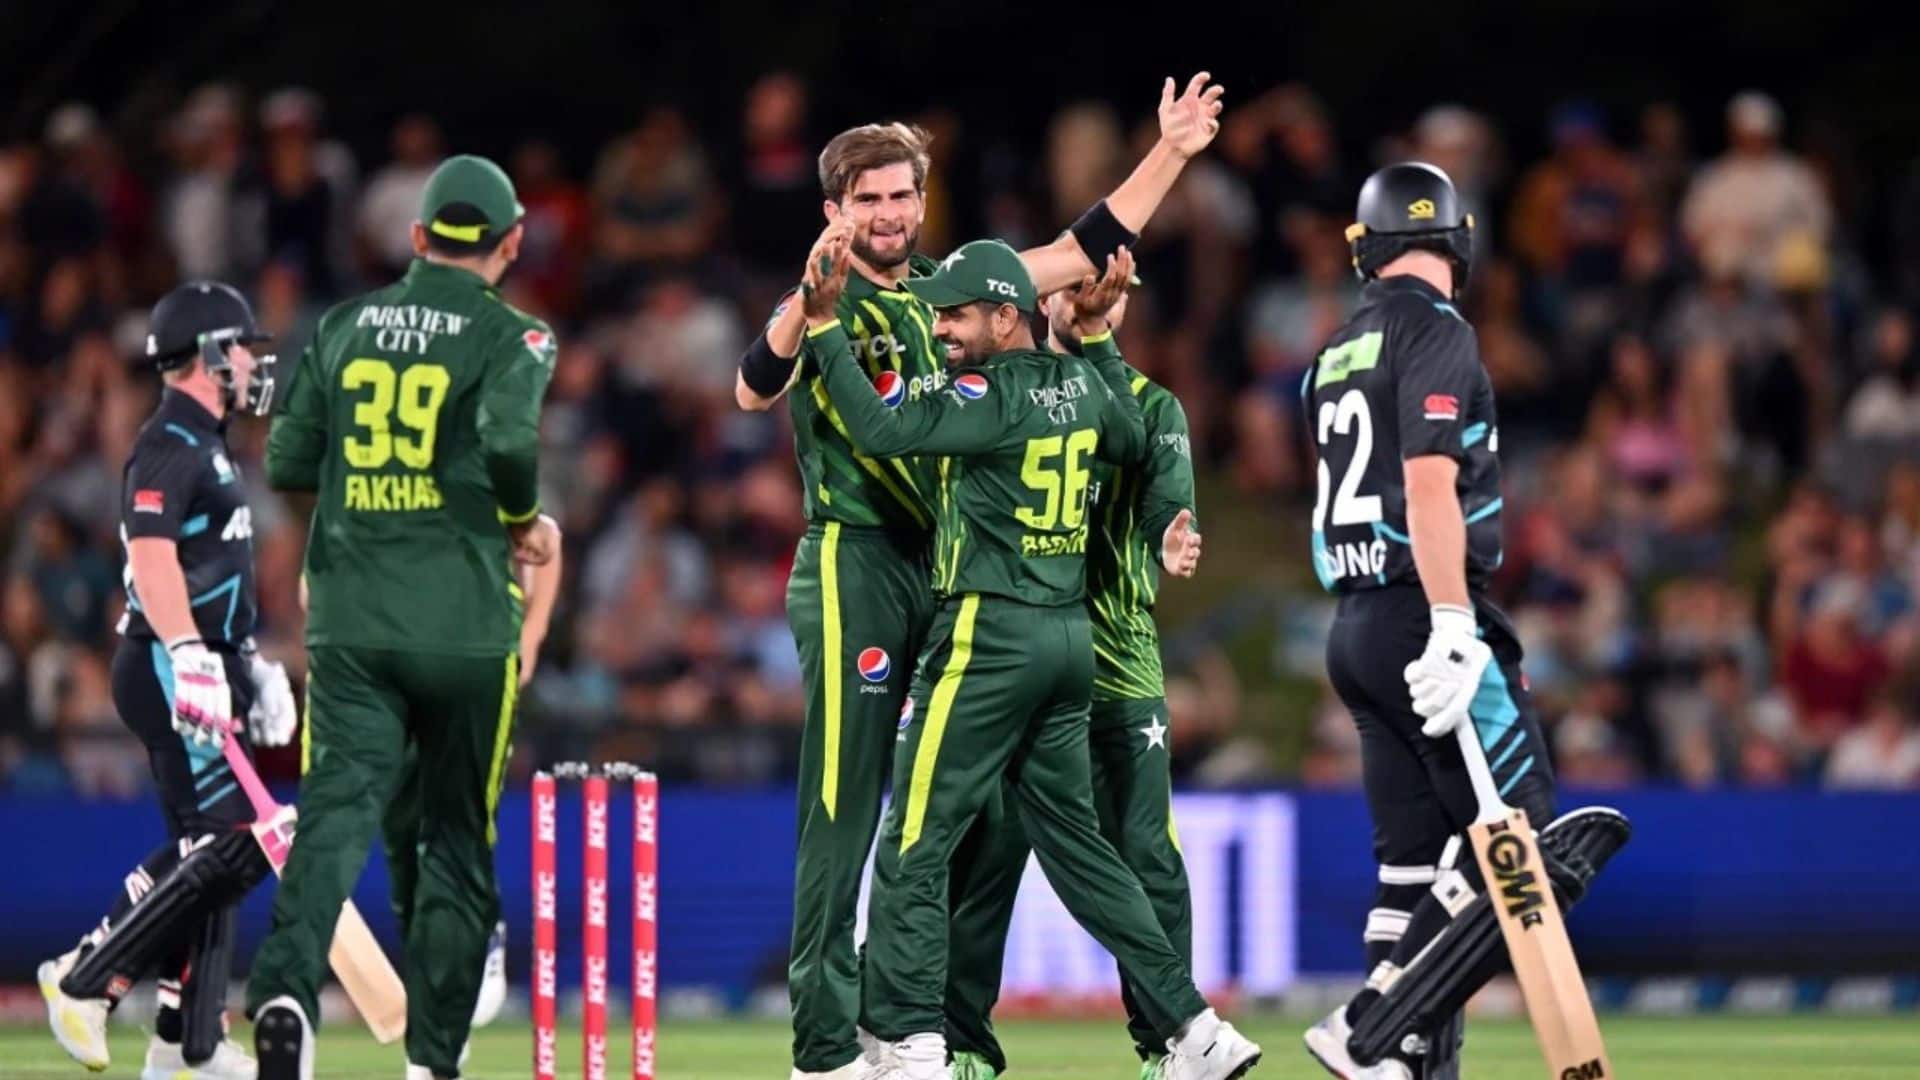 Babar To Open, Amir & Shaheen To Bowl In Tandem; Pakistan's Probable XI For 1st T20I vs NZ